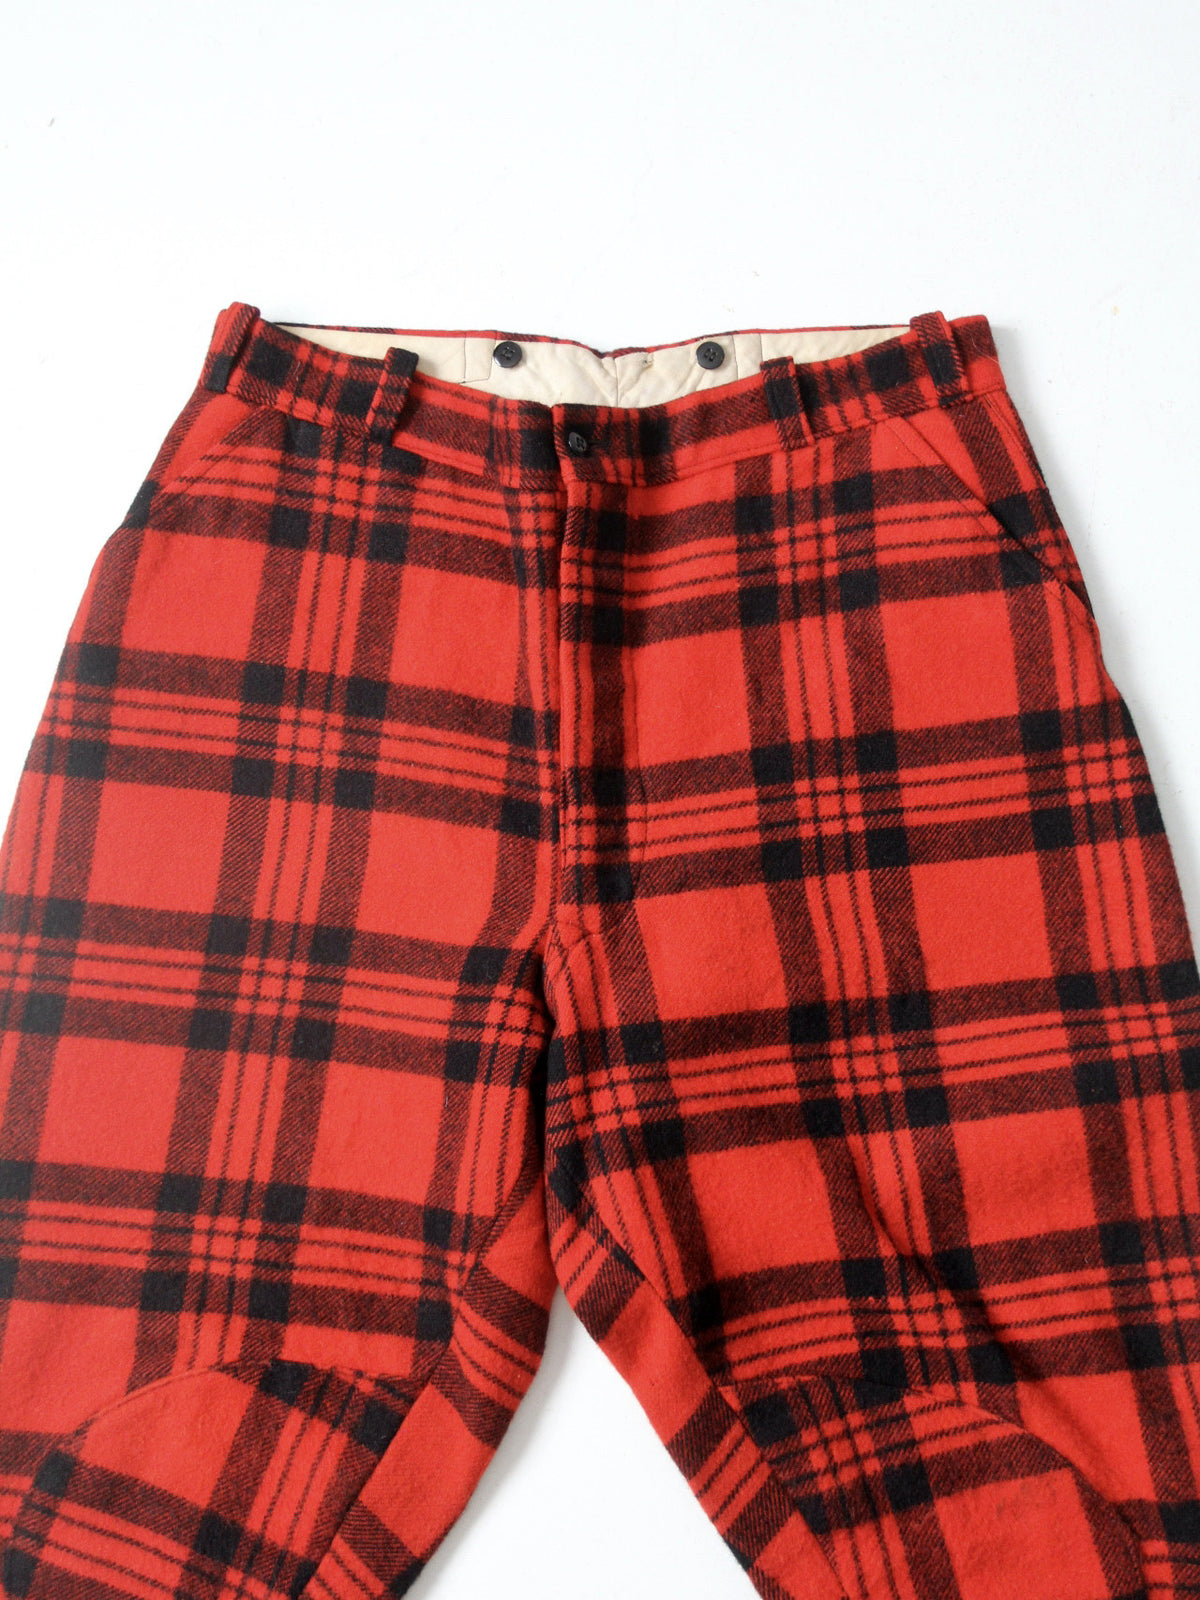 Vintage Woolrich 1963 hunting pants Black and Red ( buffalo plaid )